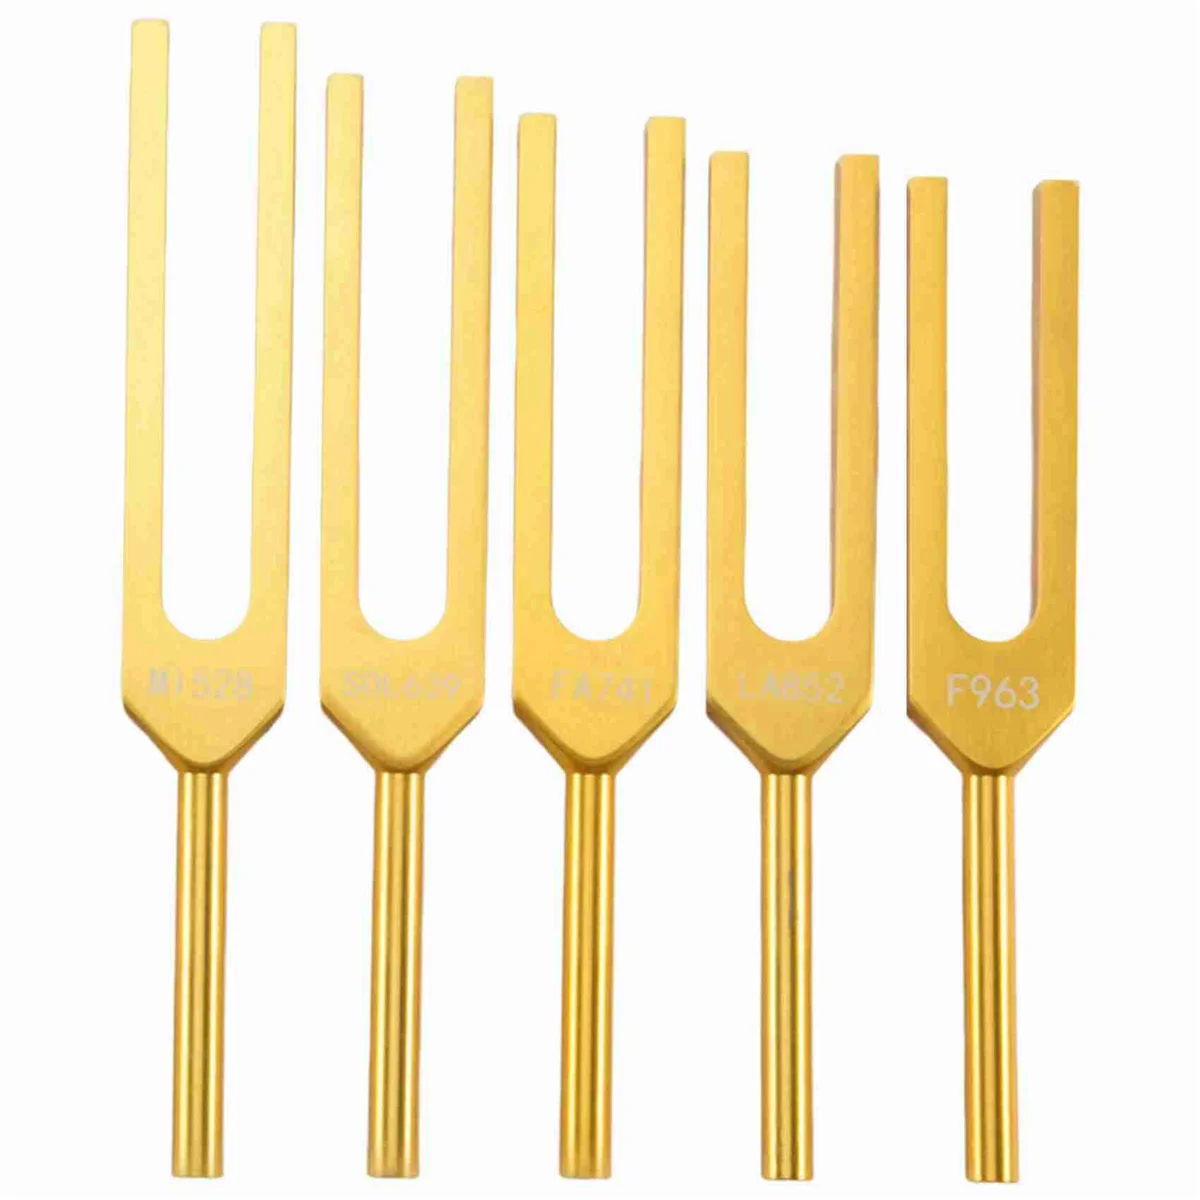 

Tuning Fork Set - 9 Tuning Forks for Healing Chakra,Sound Therapy,Keep Body,Mind and Spirit in Perfect Harmony- Gold